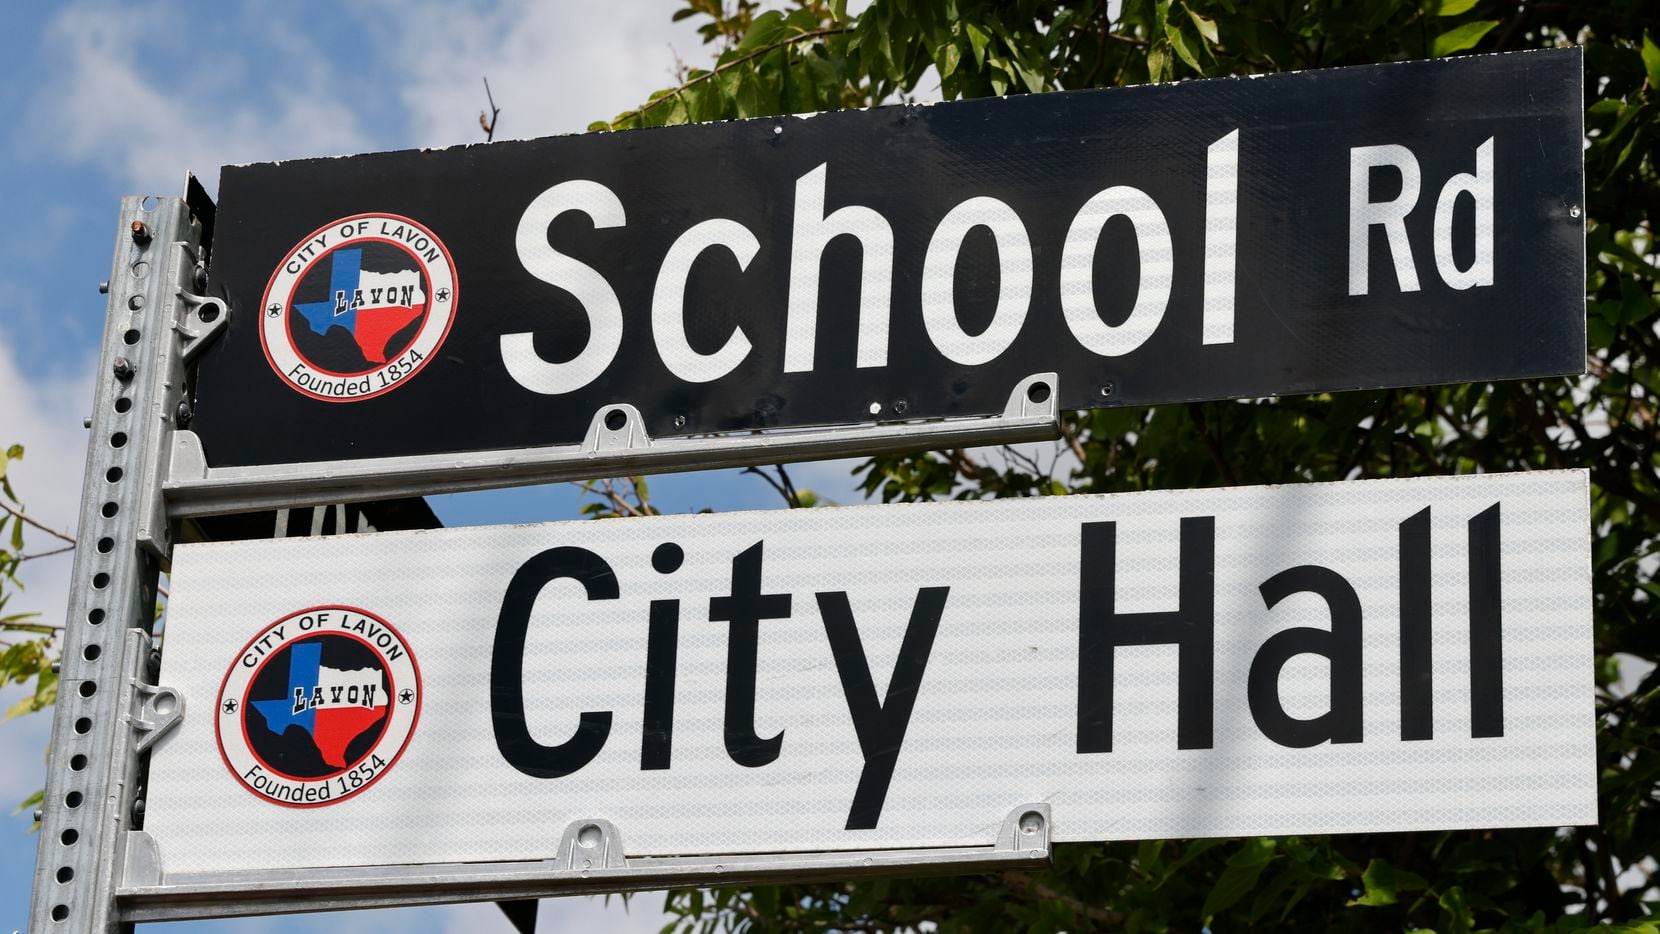 A street sign for School Road and the City Hall is pictured in Lavon on Aug. 24.